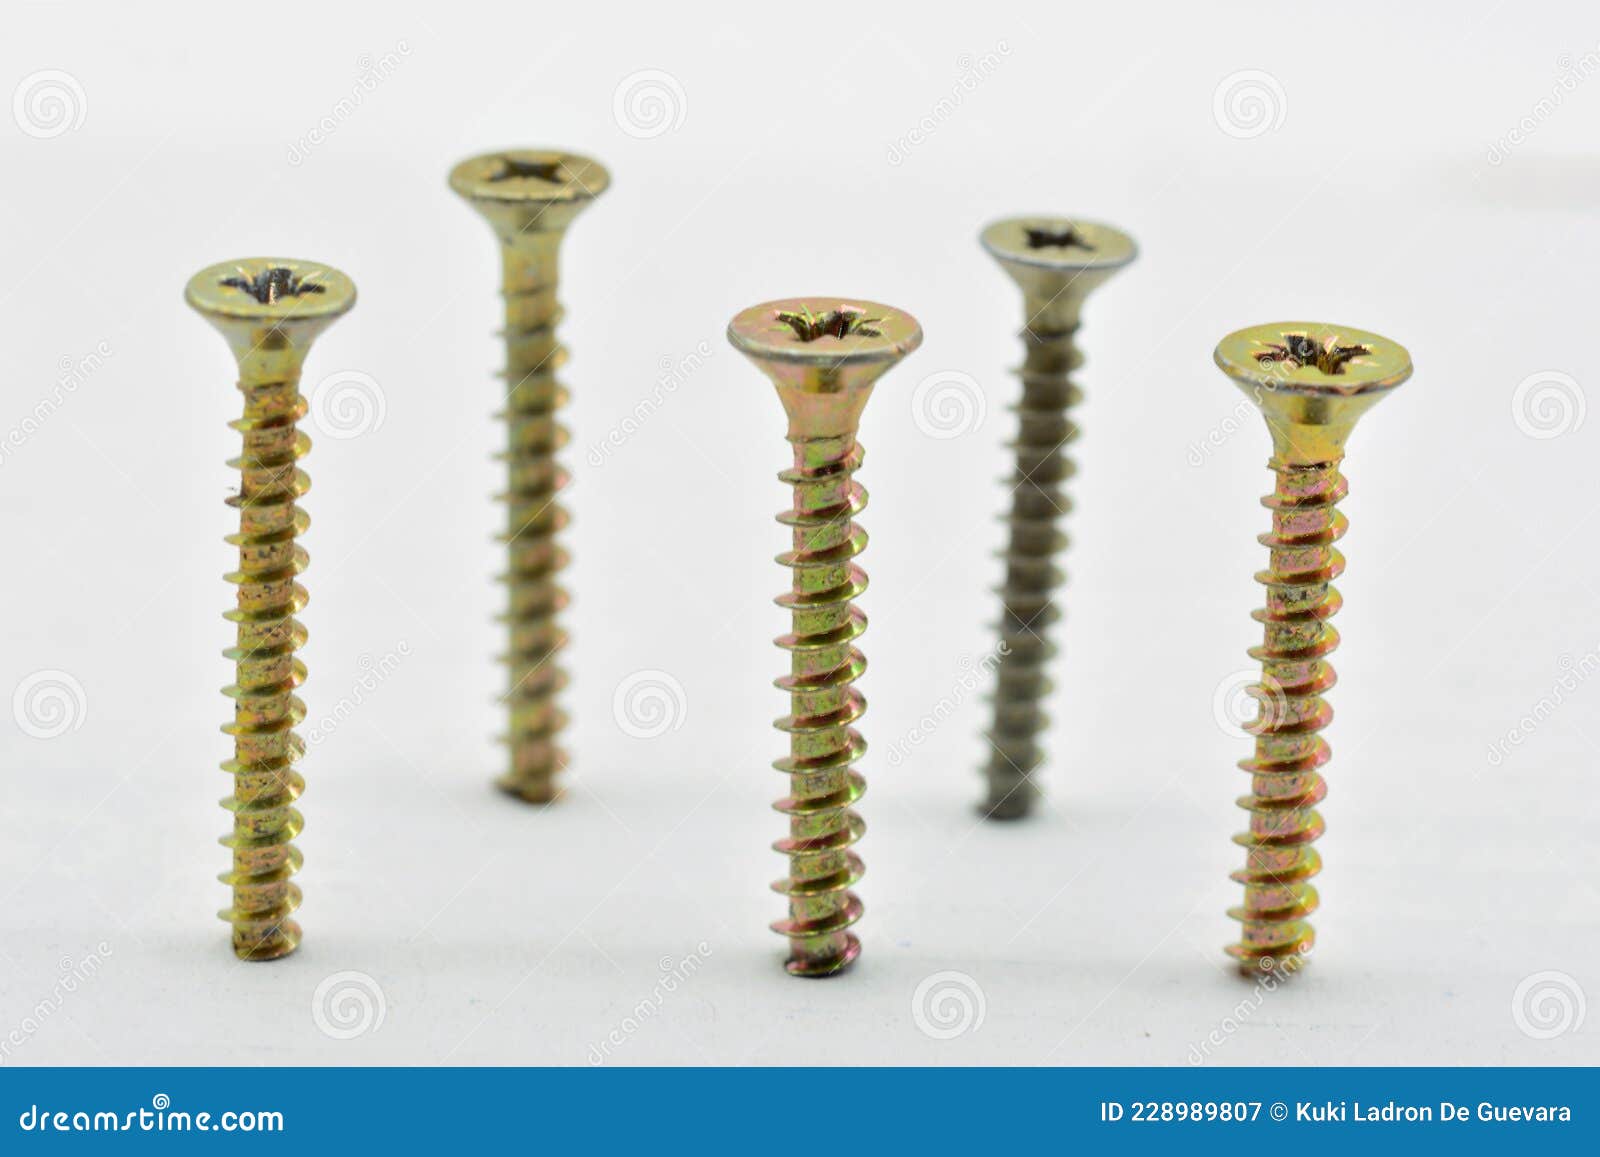 detail of some threaded screws